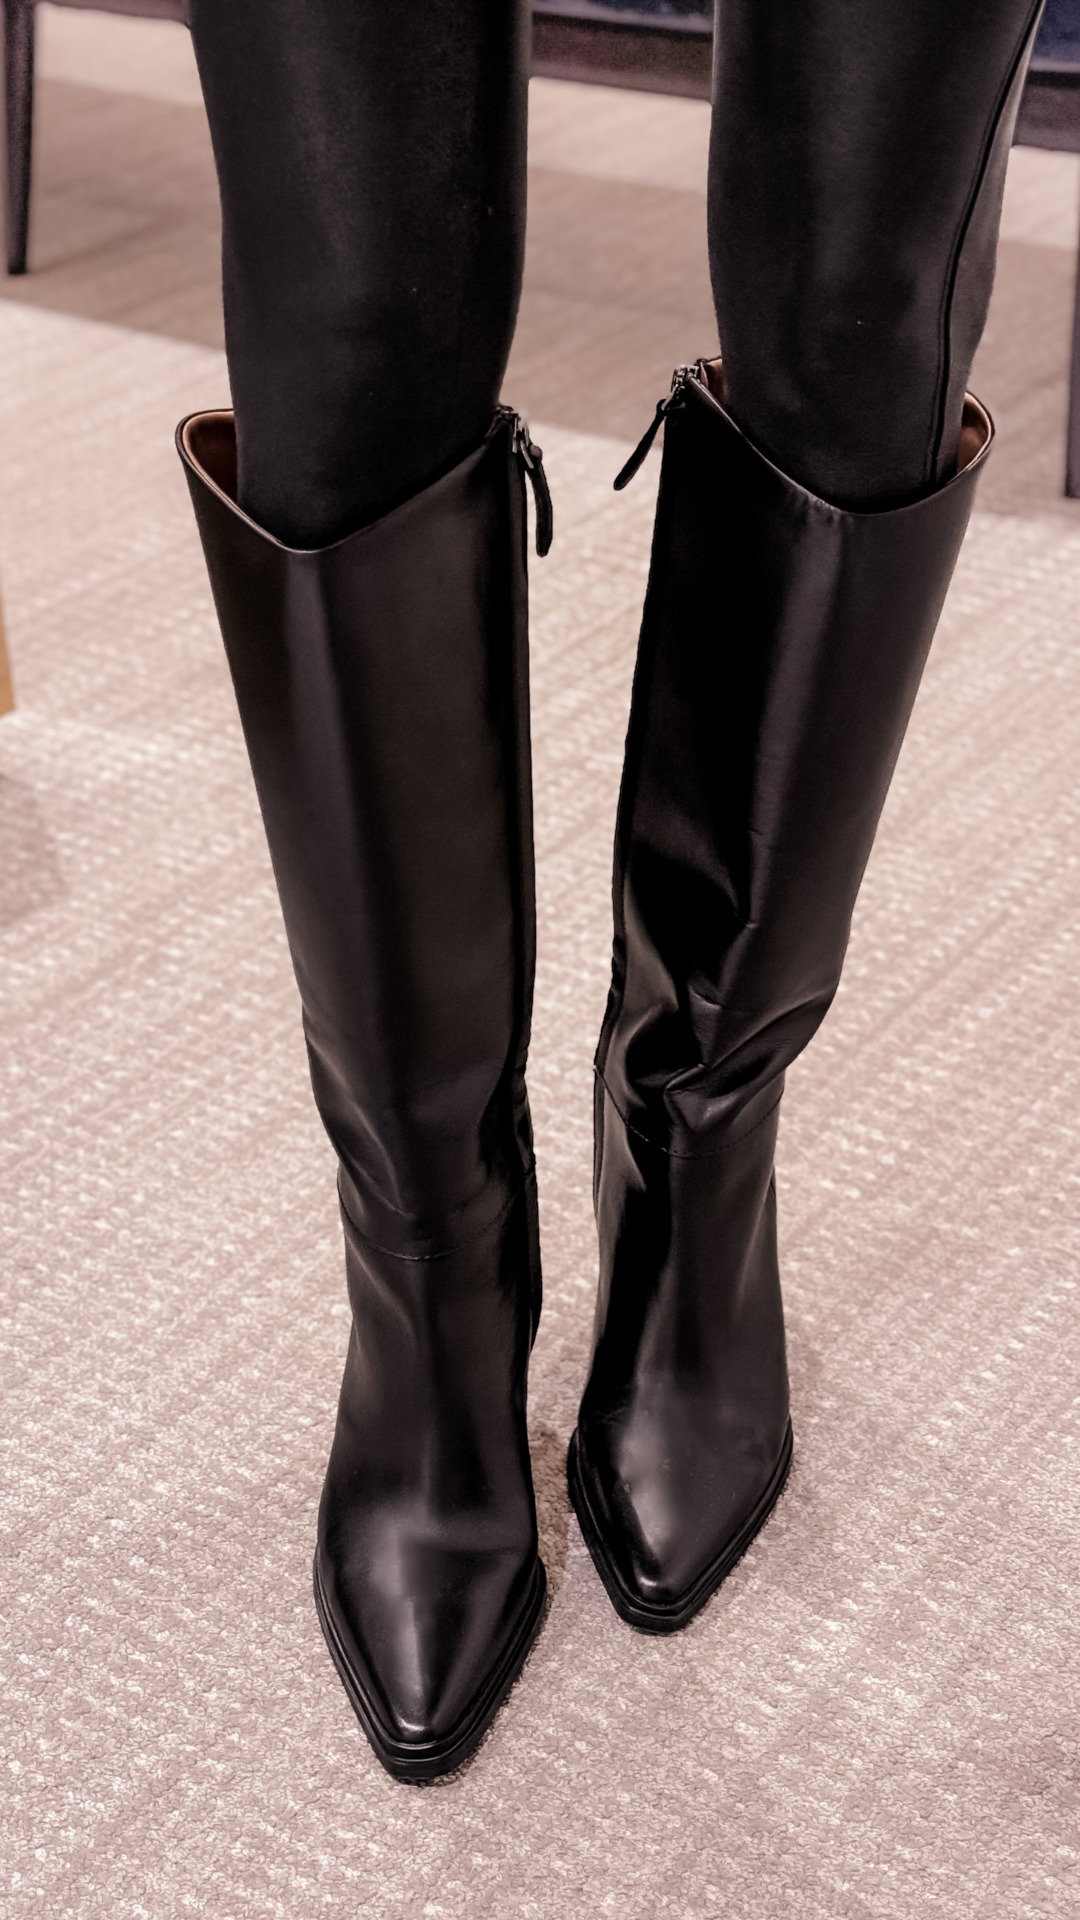 knee-high boots by Franco Sarto